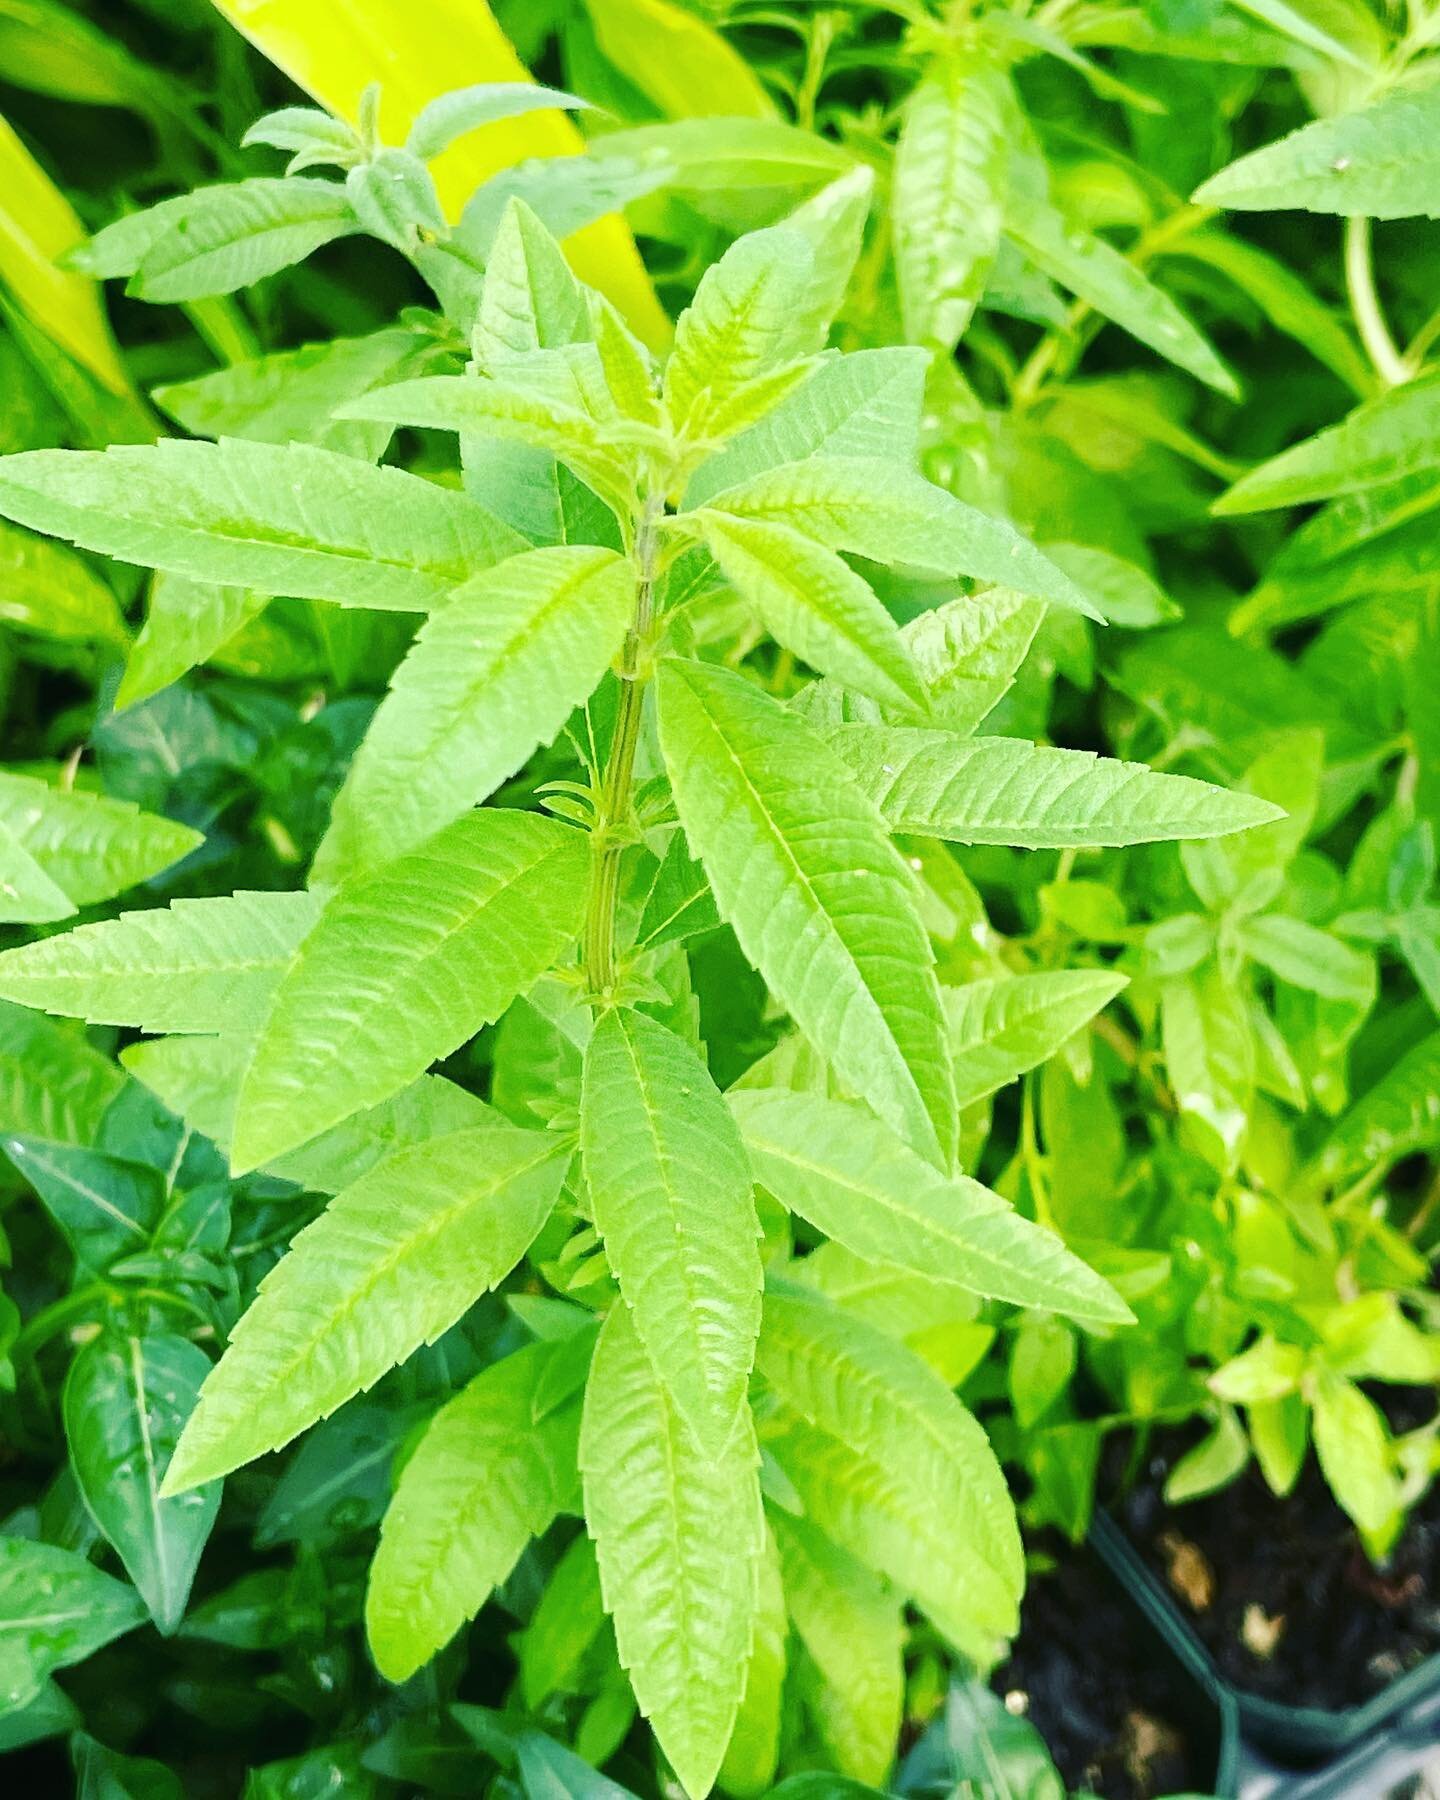 Sunday spotlight: as the hot weather rolls in, lemon verbena is thriving. It&rsquo;s not a coincidence that it makes the best iced tea for these hot humid days! #peatfree #urbannursery